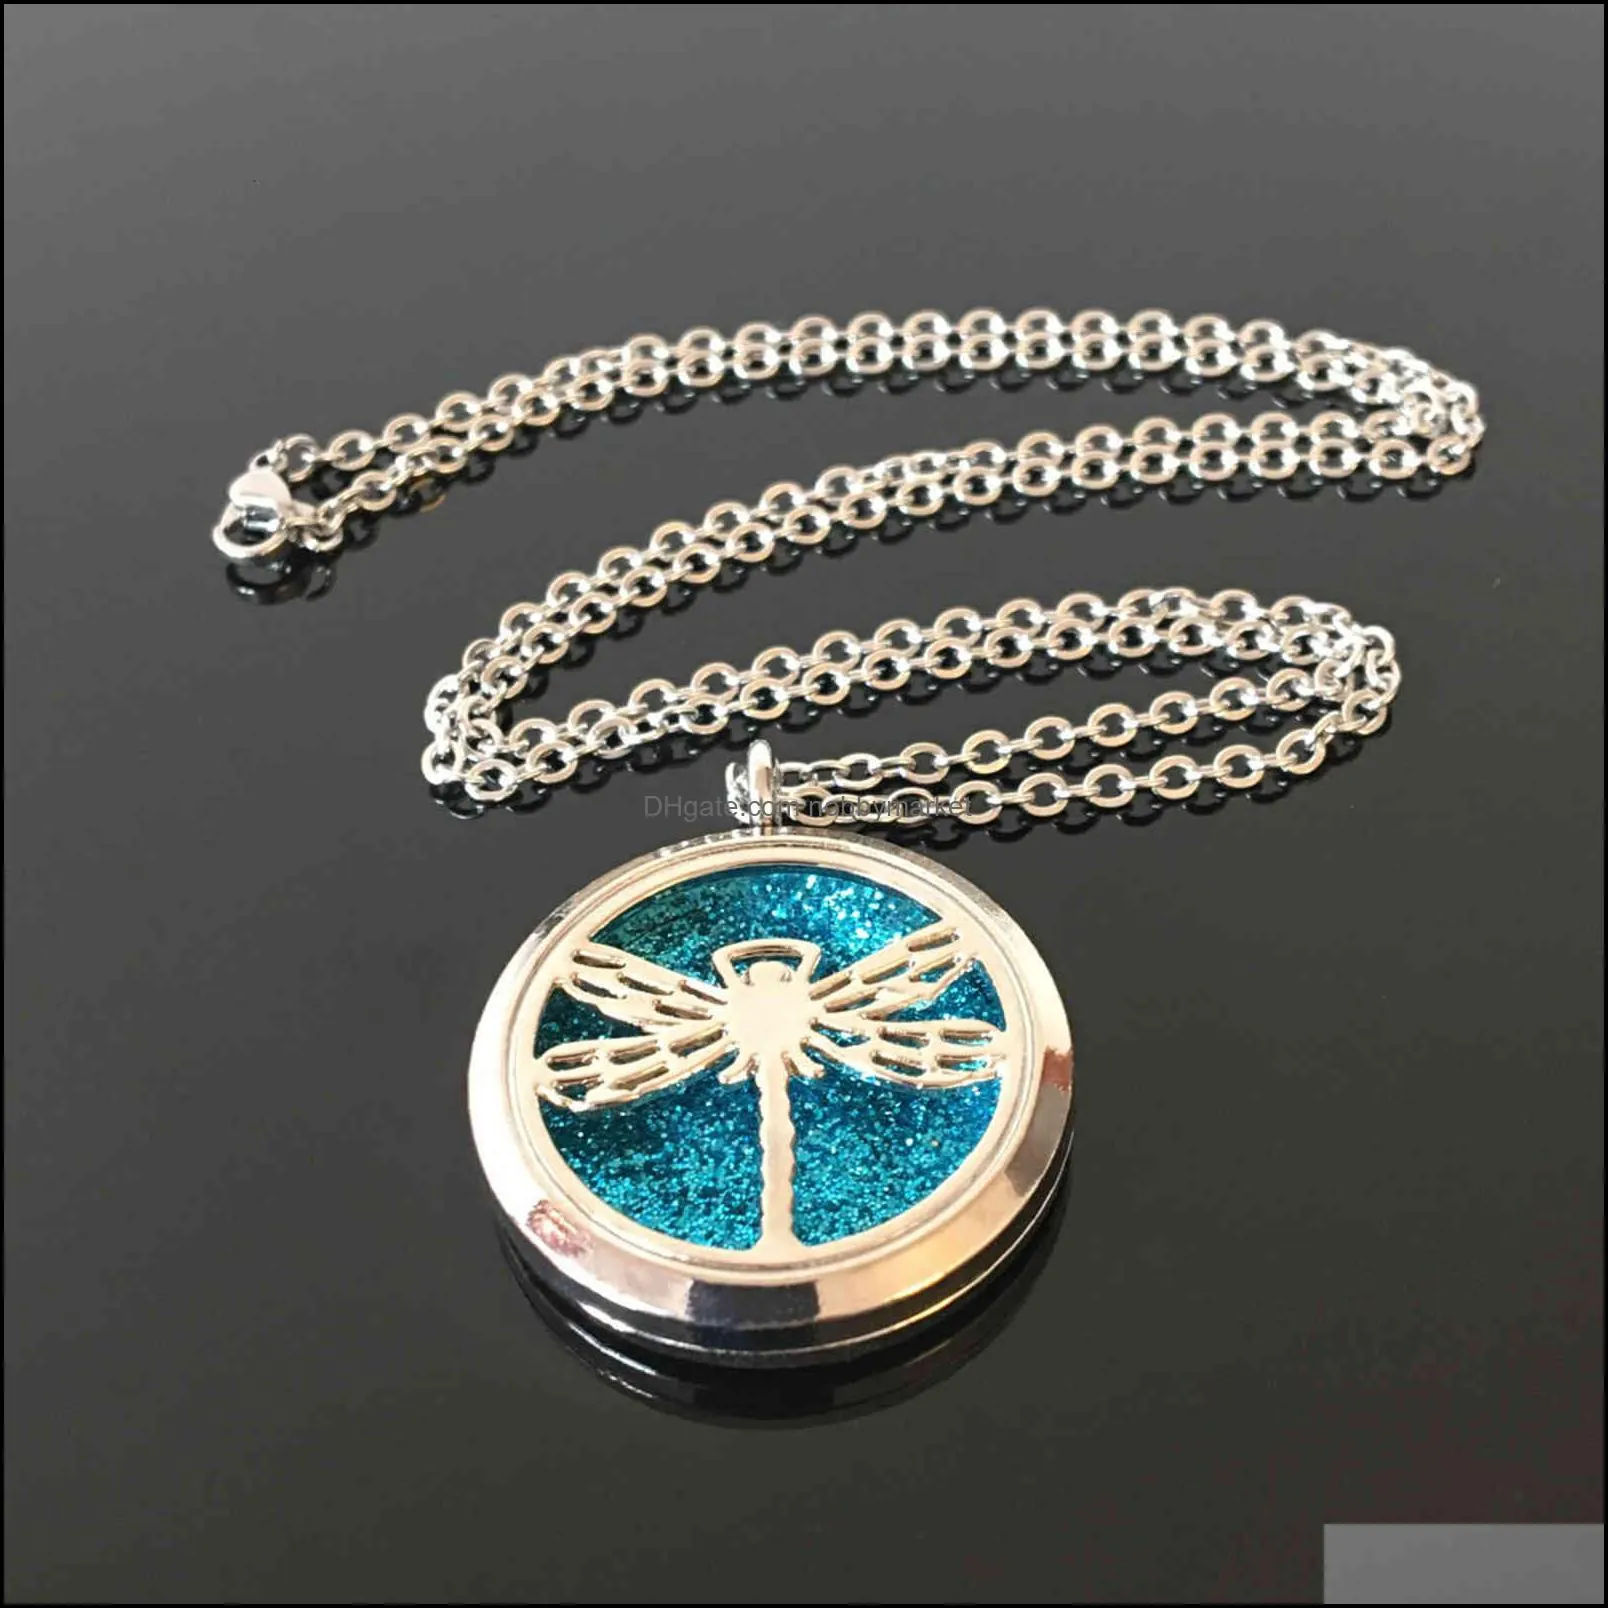 Factory Outlet Brand Necklace Locket  Oil Diffuser Fashion Stainless Steel Aromatherapy Therapy Tree of Life Flower Animal